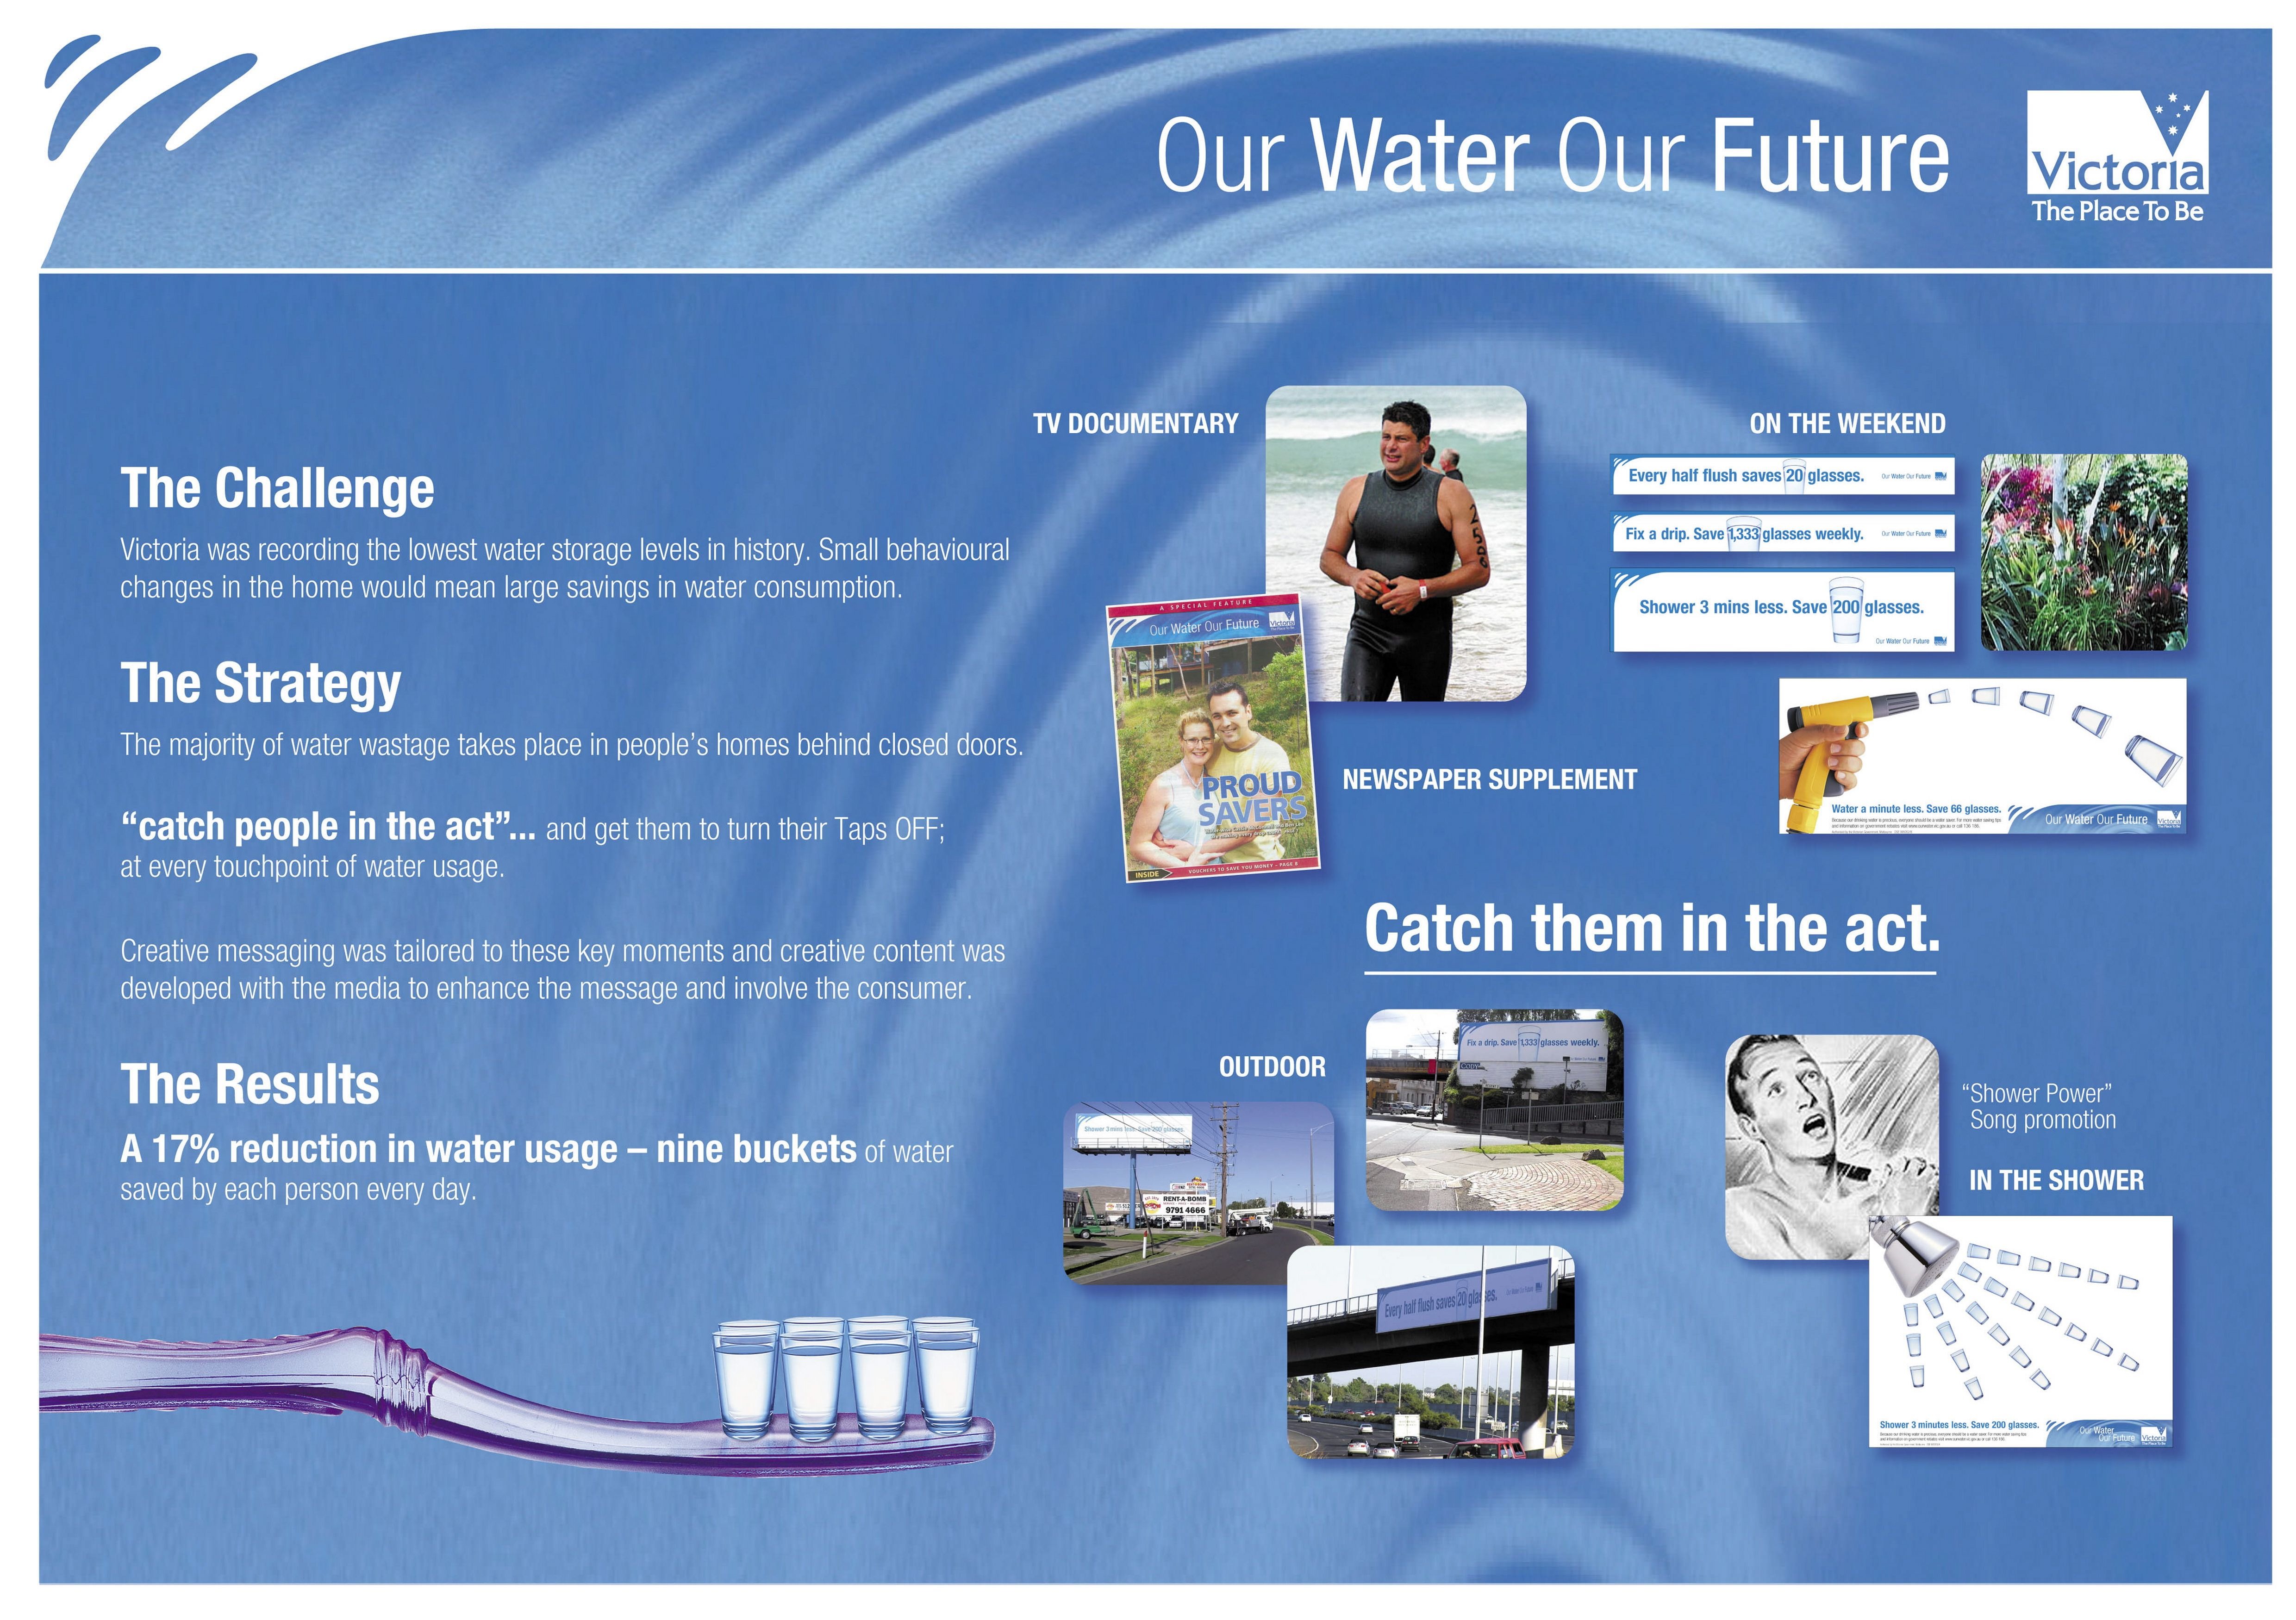 OUR WATER OUR FUTURE